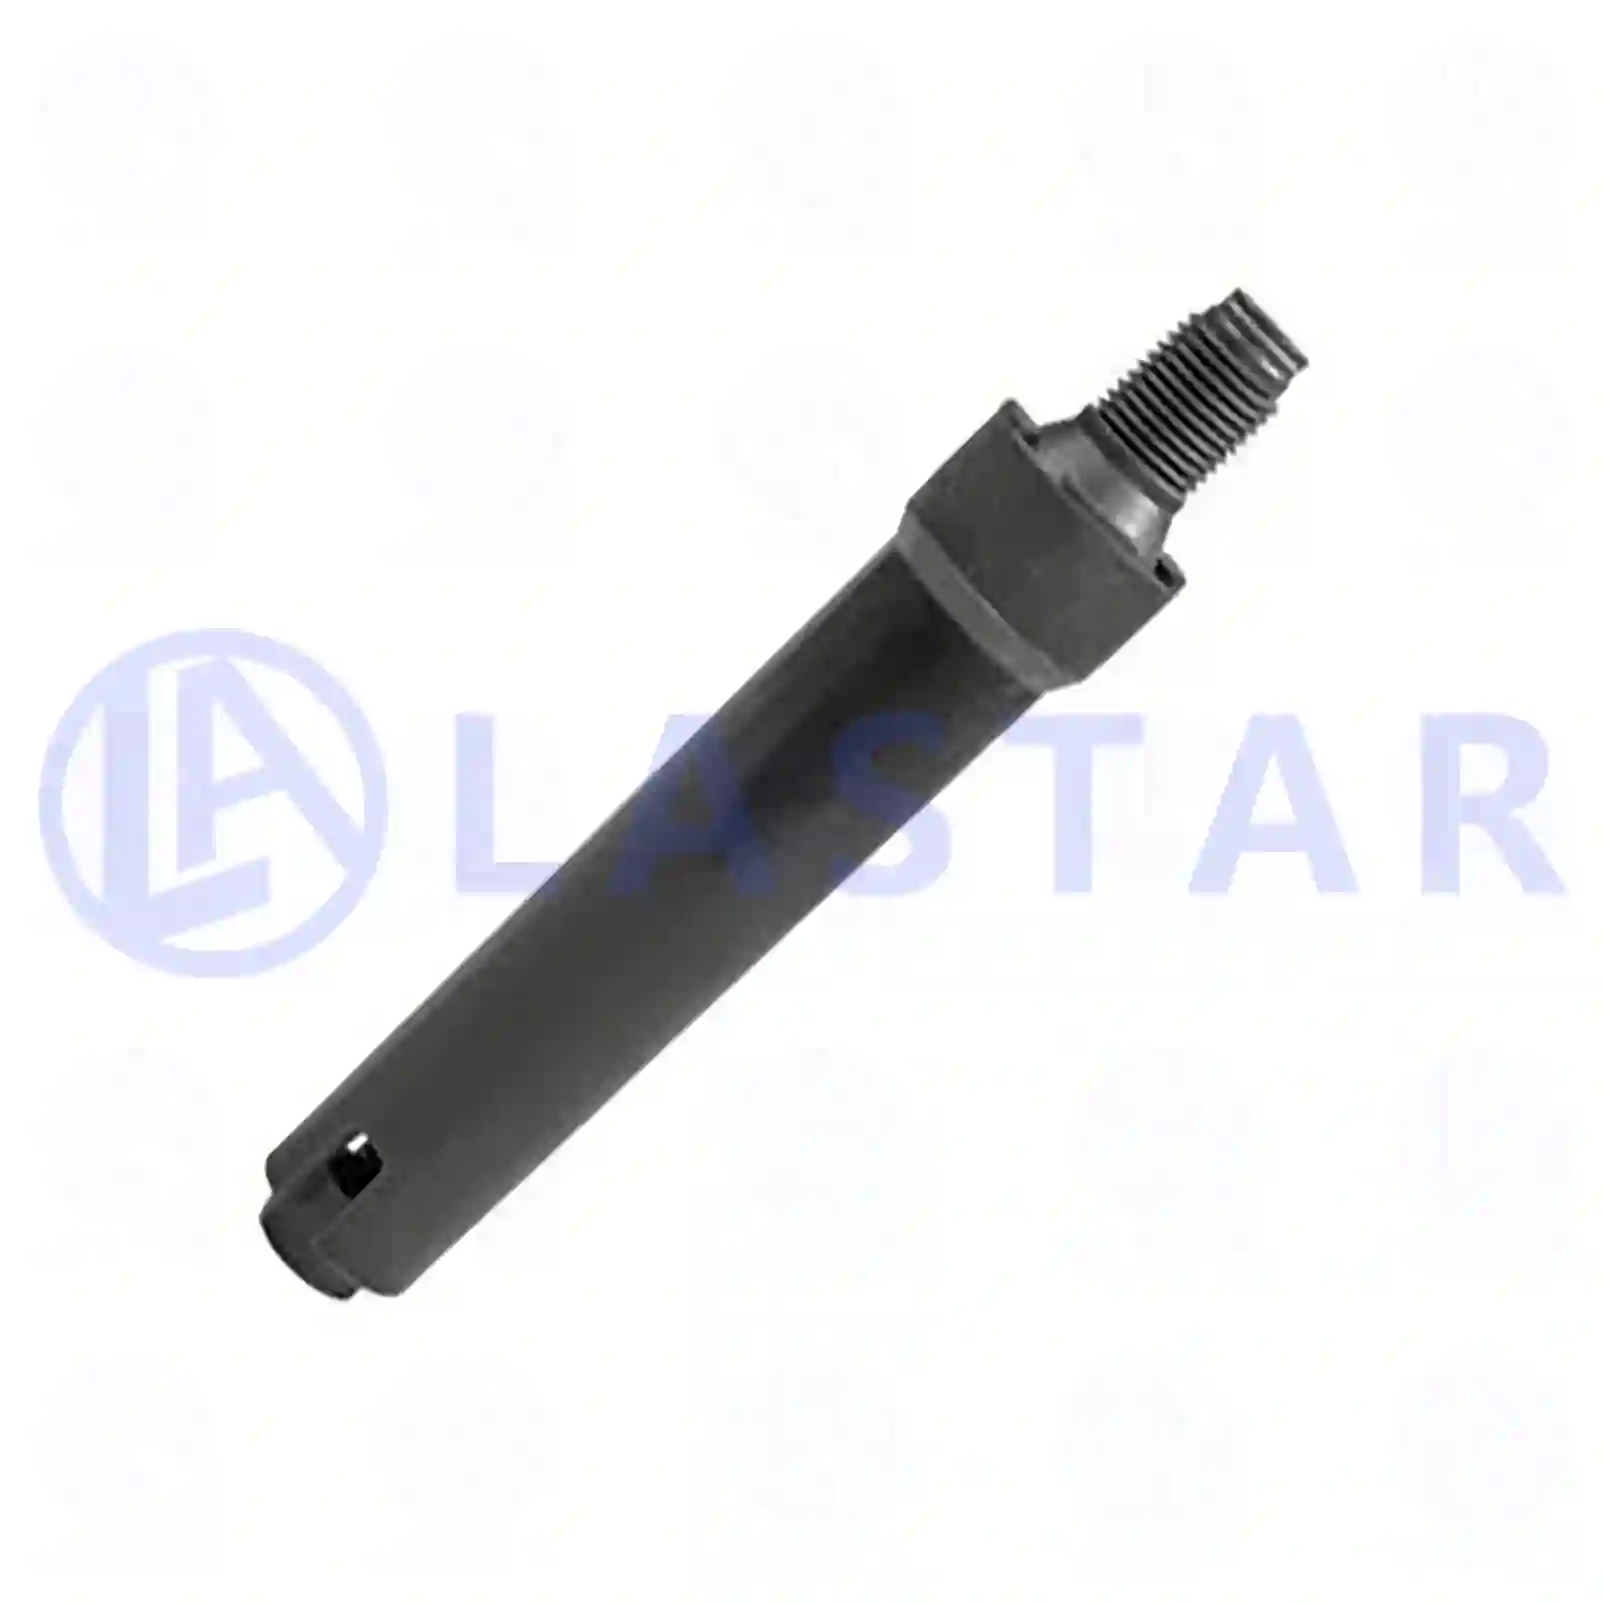 Pipe, fuel filter, 77724577, 1473979, ZG01878-0008 ||  77724577 Lastar Spare Part | Truck Spare Parts, Auotomotive Spare Parts Pipe, fuel filter, 77724577, 1473979, ZG01878-0008 ||  77724577 Lastar Spare Part | Truck Spare Parts, Auotomotive Spare Parts